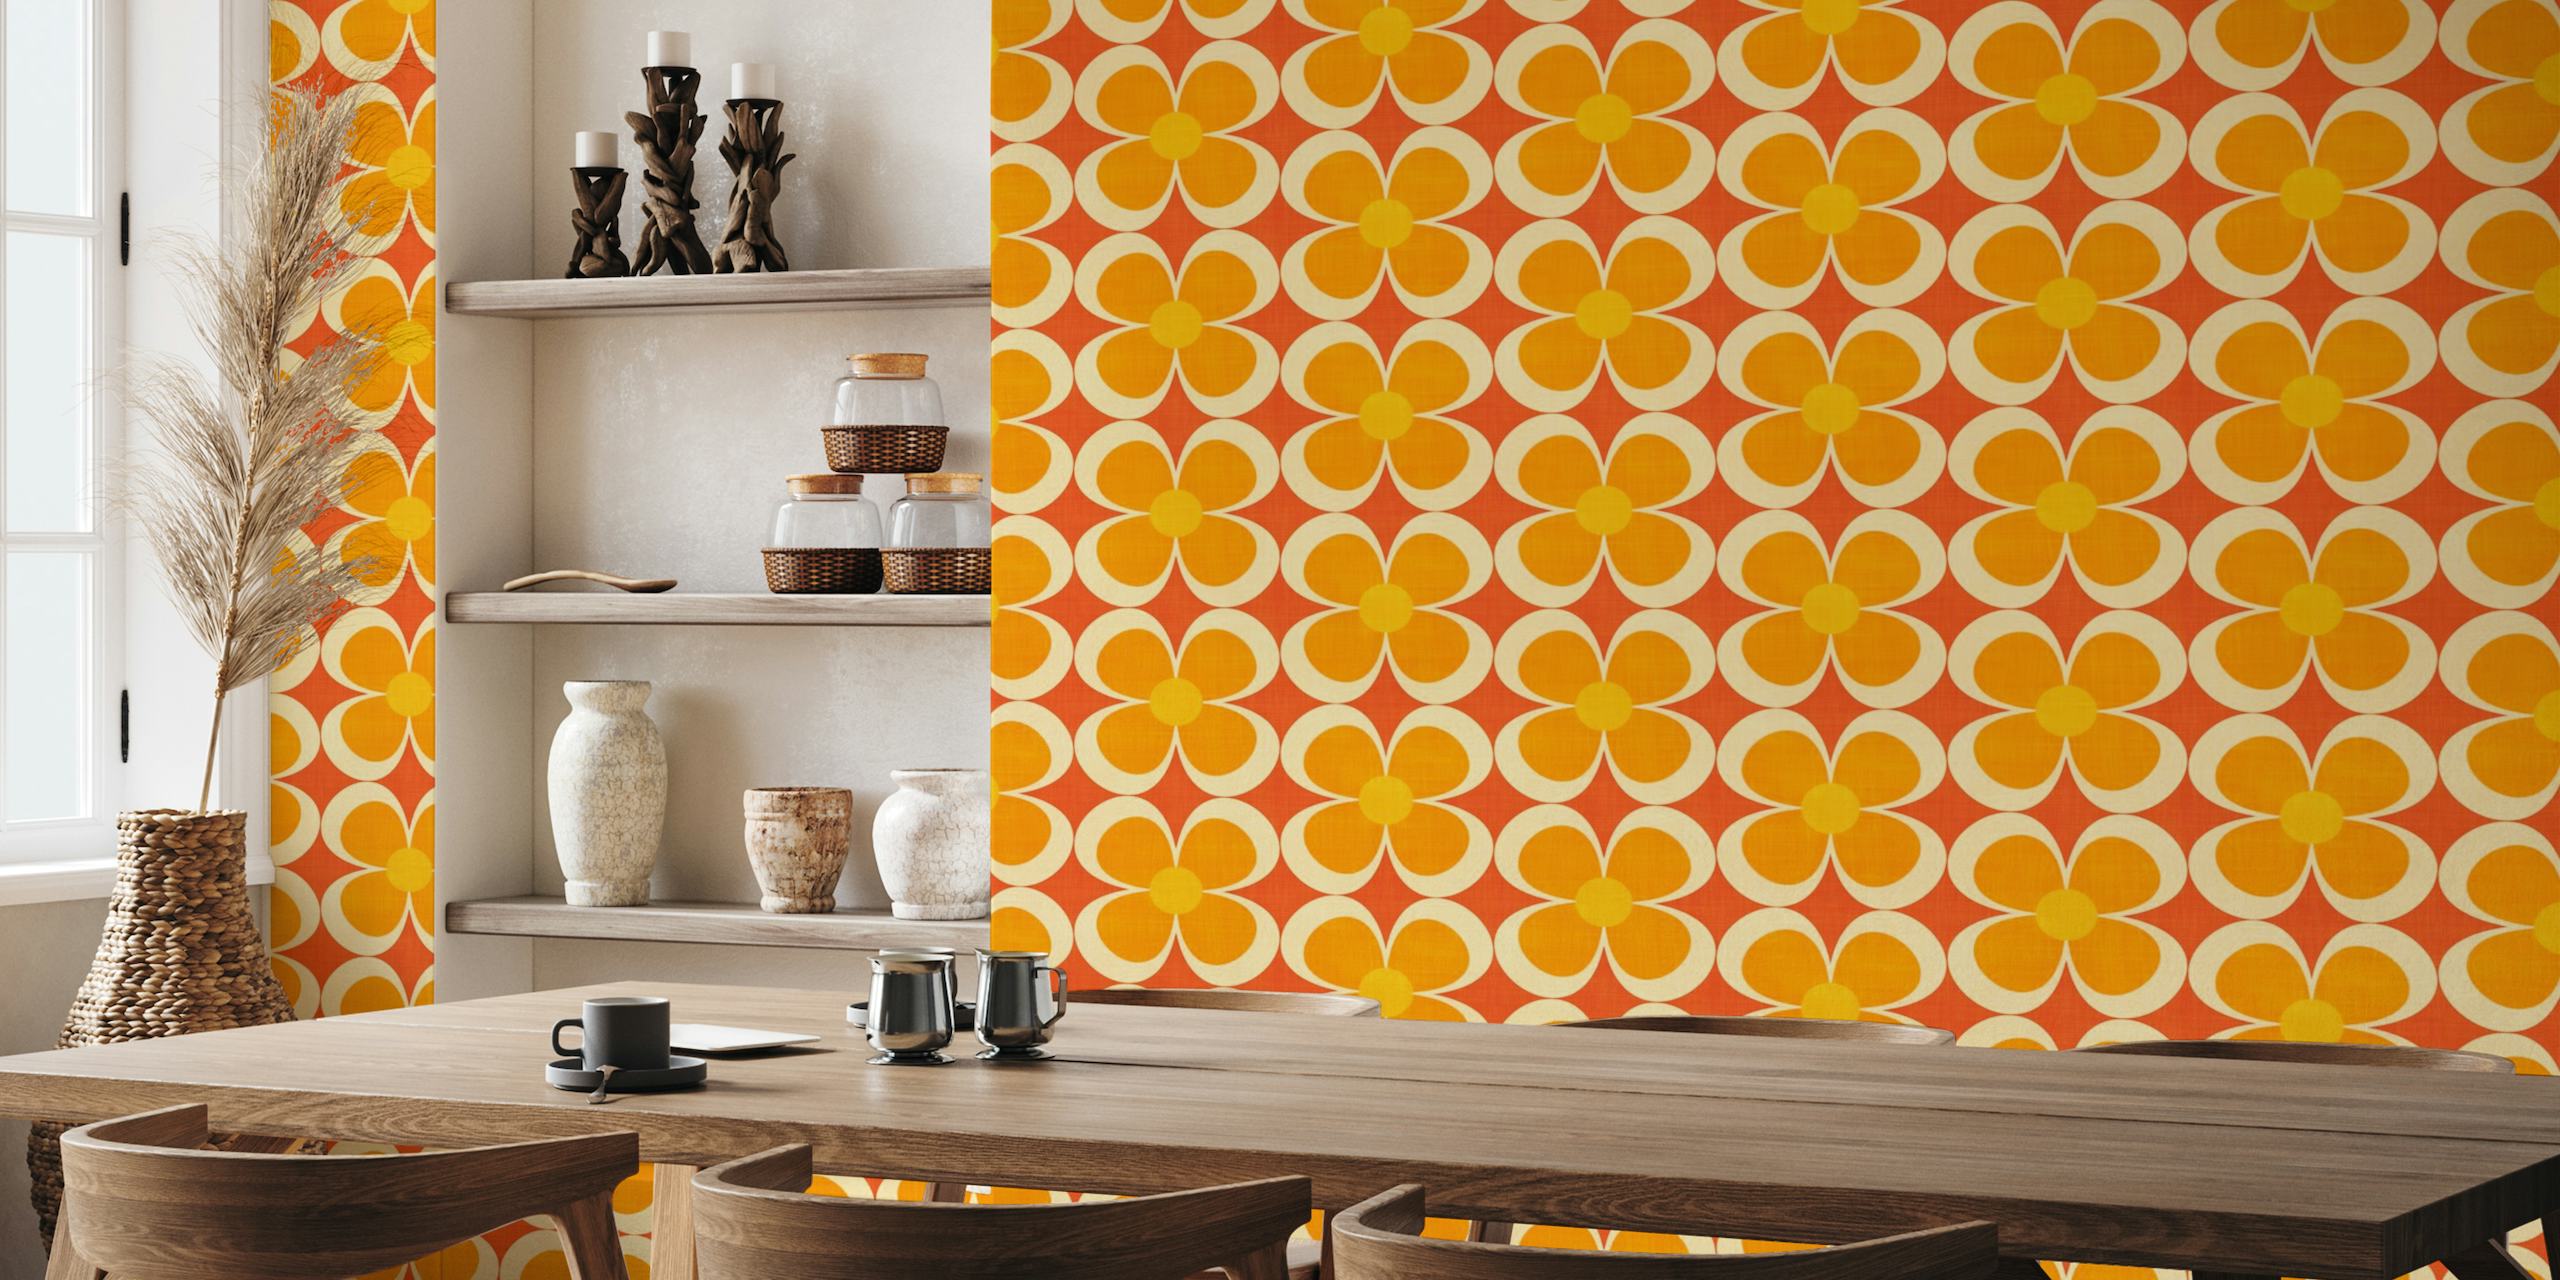 Groovy Geometric Floral Orange Red Small wallpaper